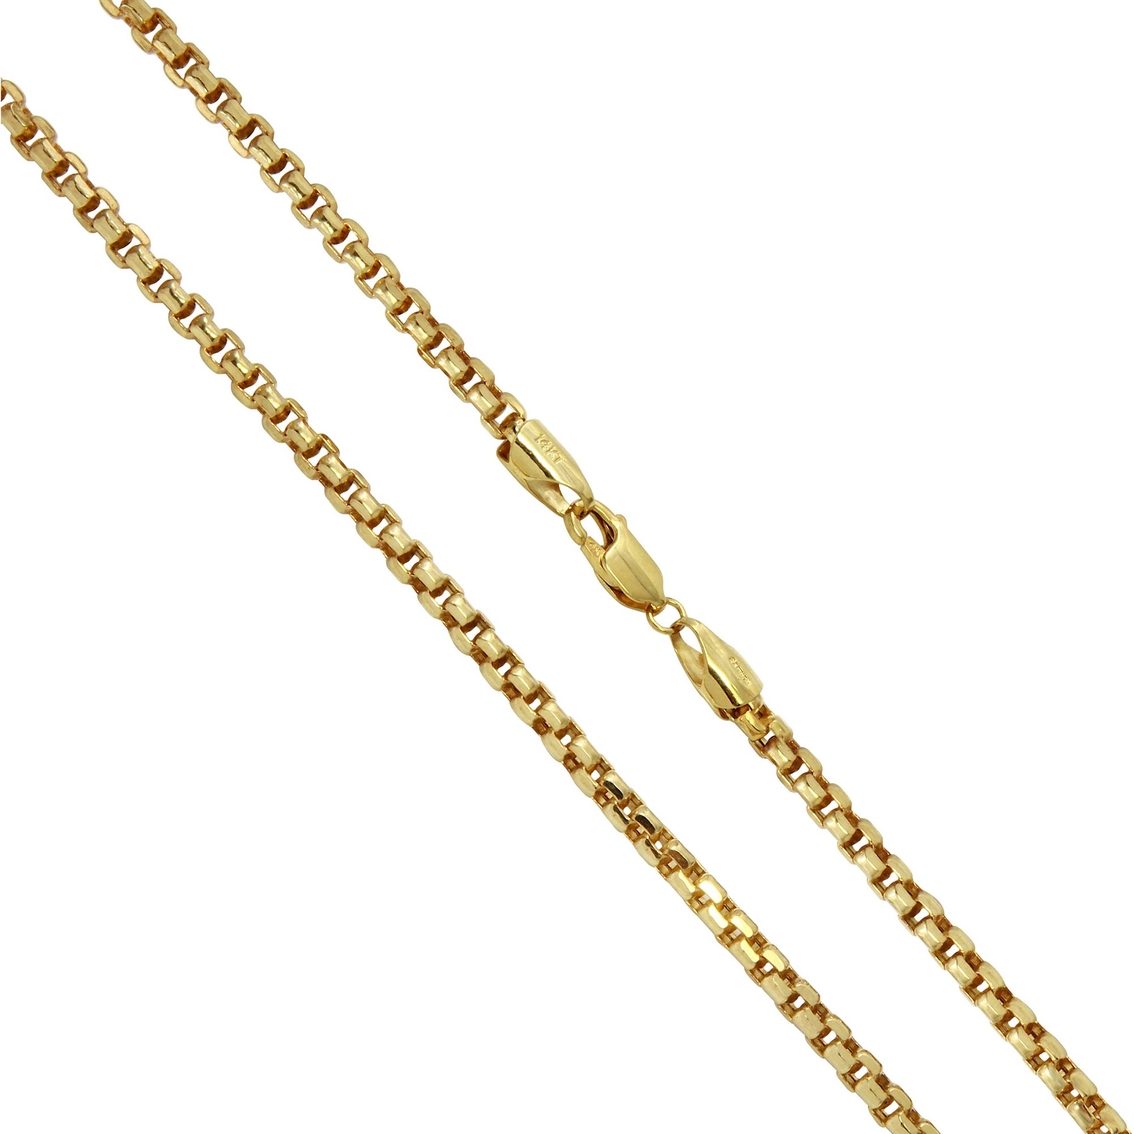 10K Yellow Gold 3.5mm Box Rollo Chain 22 in. - Image 2 of 2